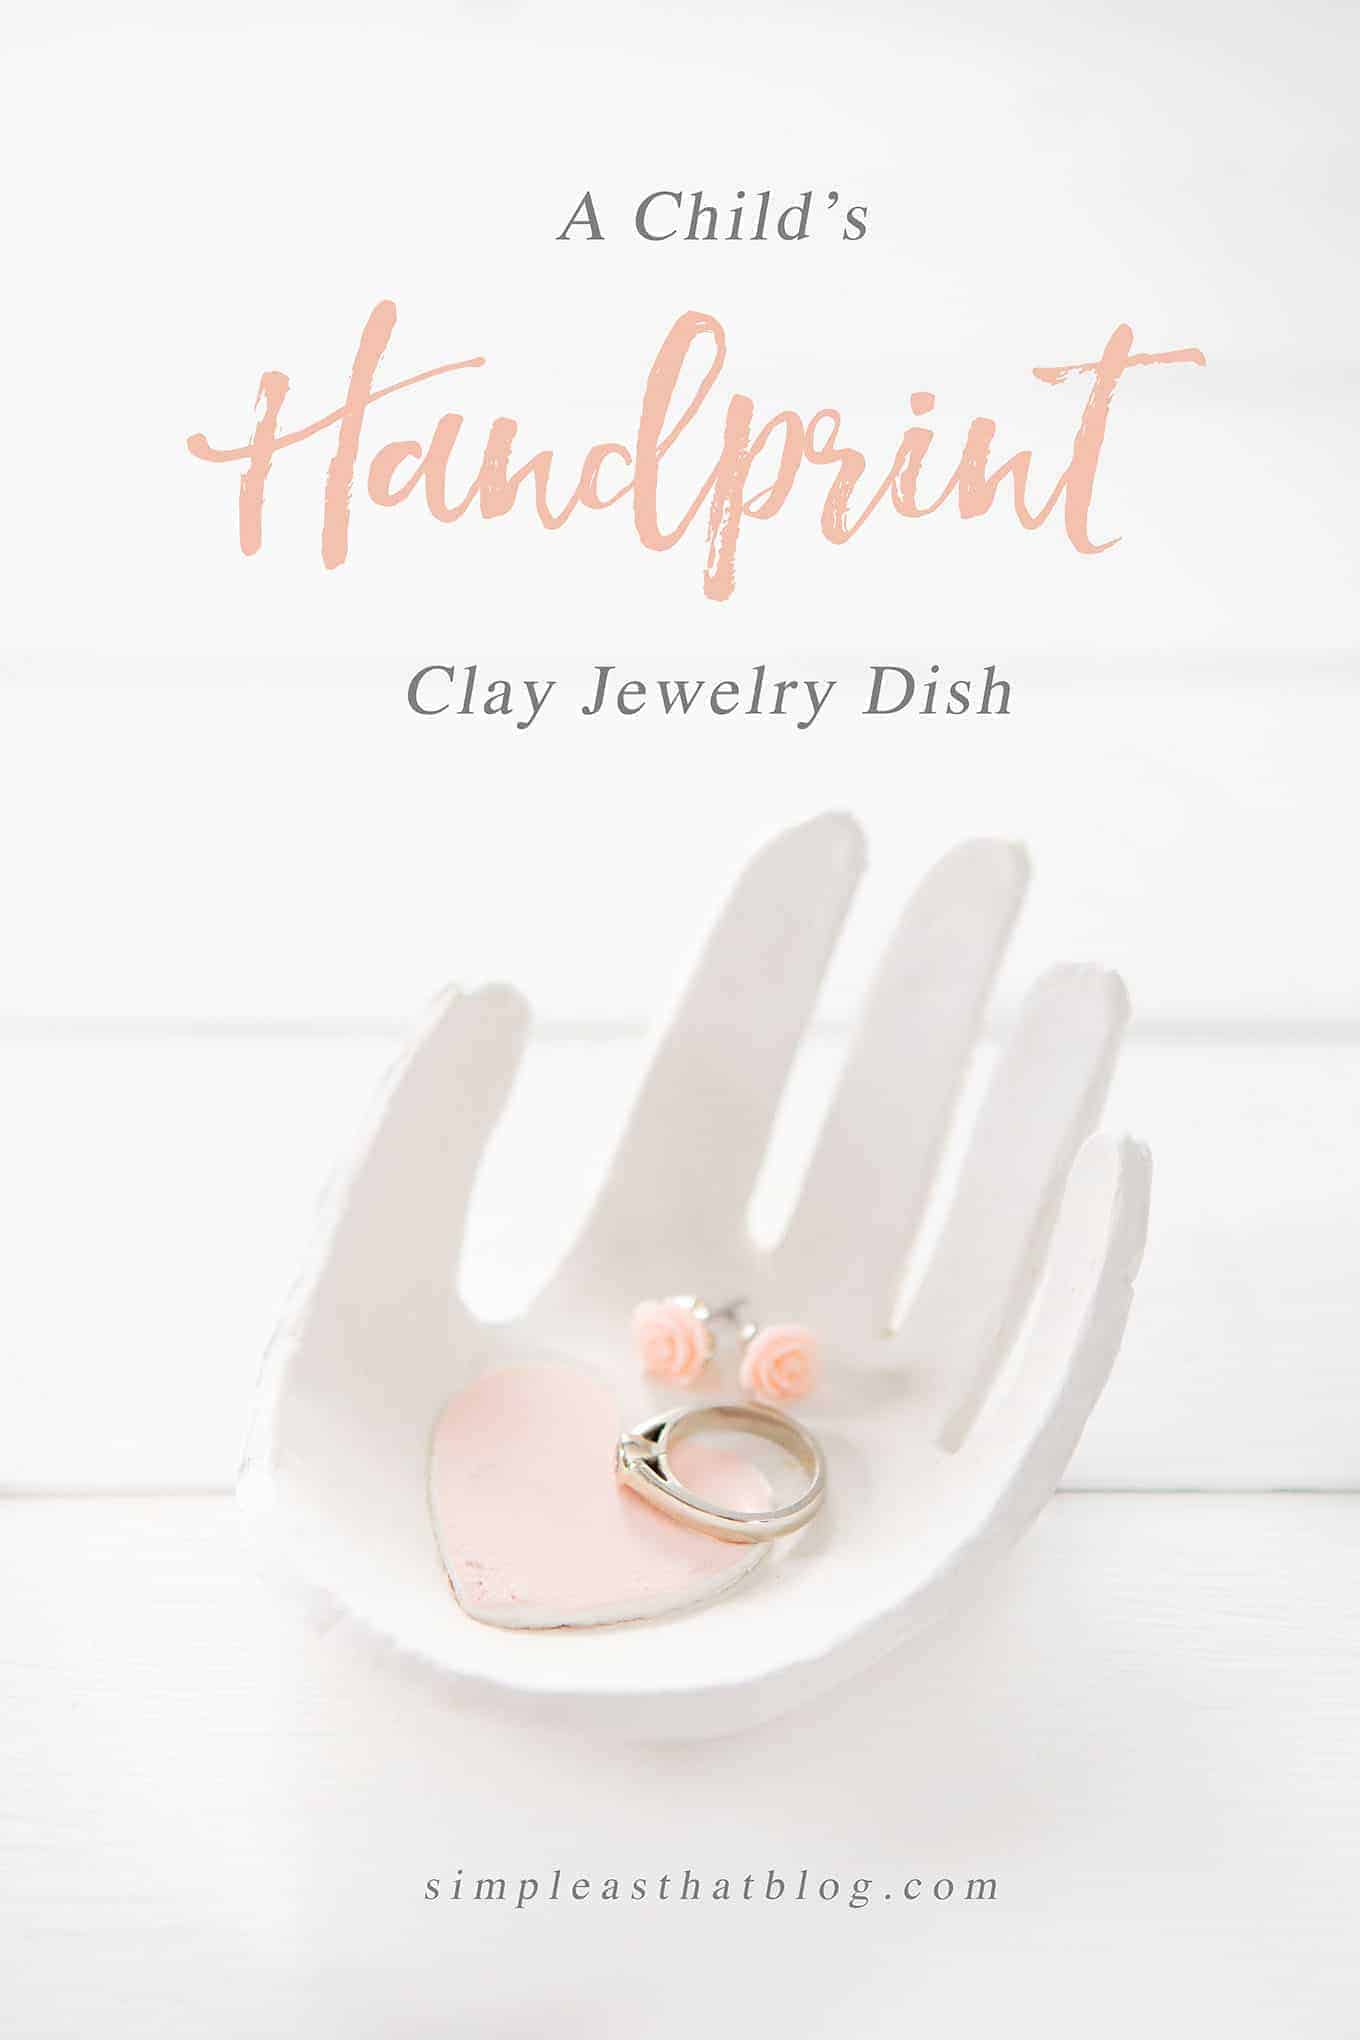 Clay jewelry dish made from child's handprint